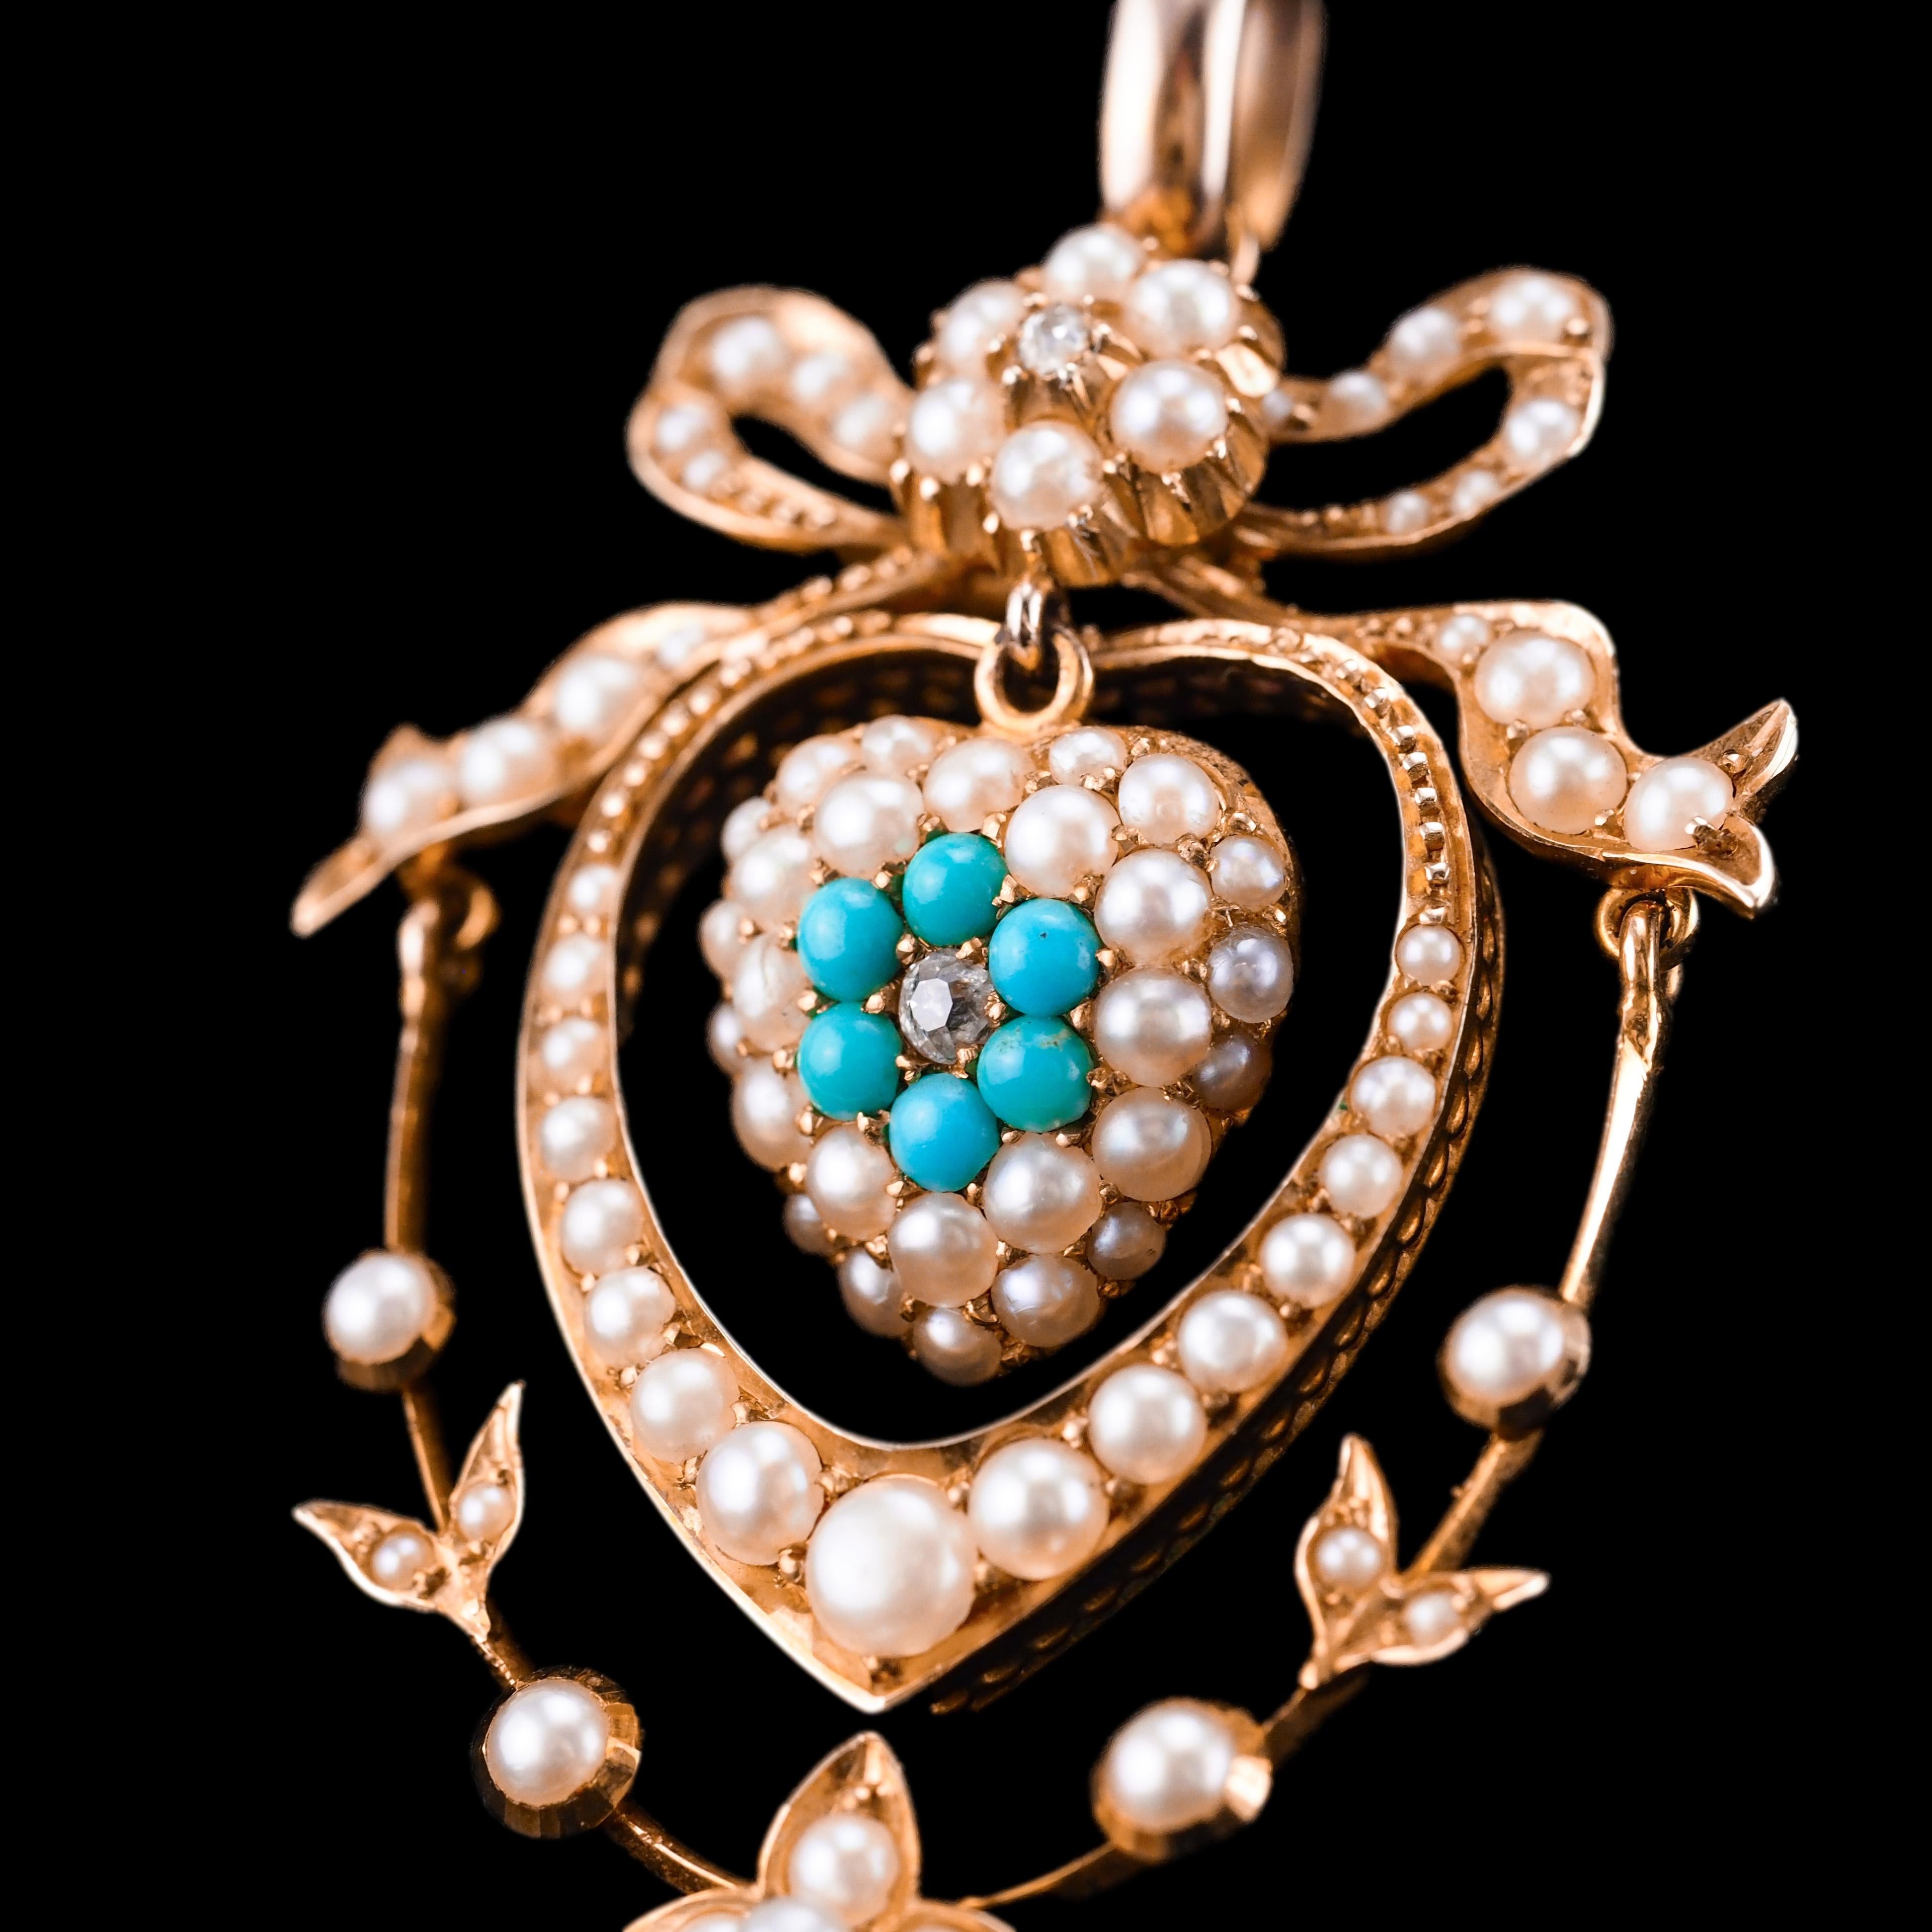 Antique Edwardian 15K Gold Turquoise Diamond & Seed Pearl Pendant Necklace c1910 For Sale 5